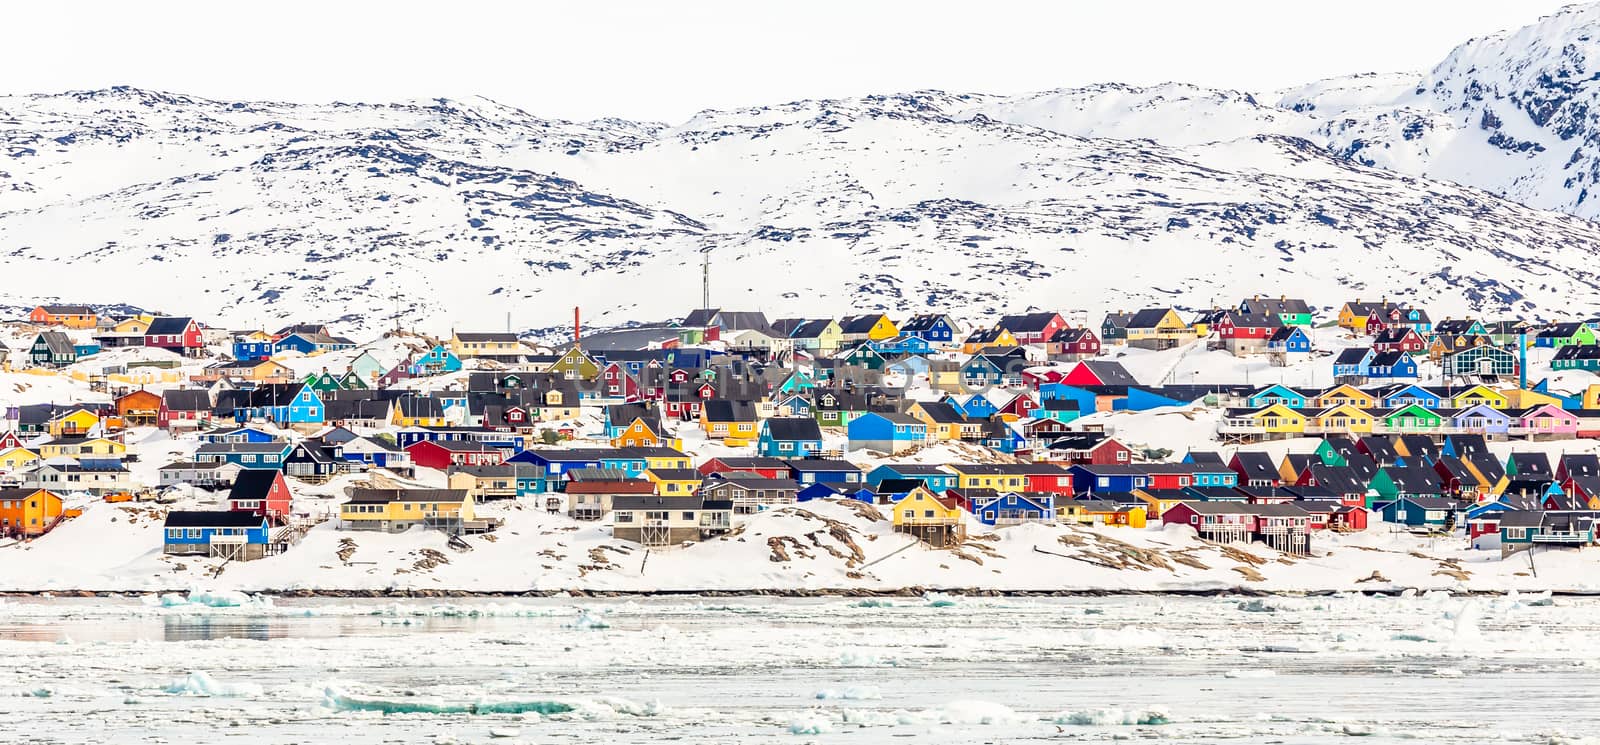 Arctic city center panorama with colorful Inuit houses on the rocky hills covered in snow with snow and mountain in the background, Ilulissat, Avannaata municipality, Greenland